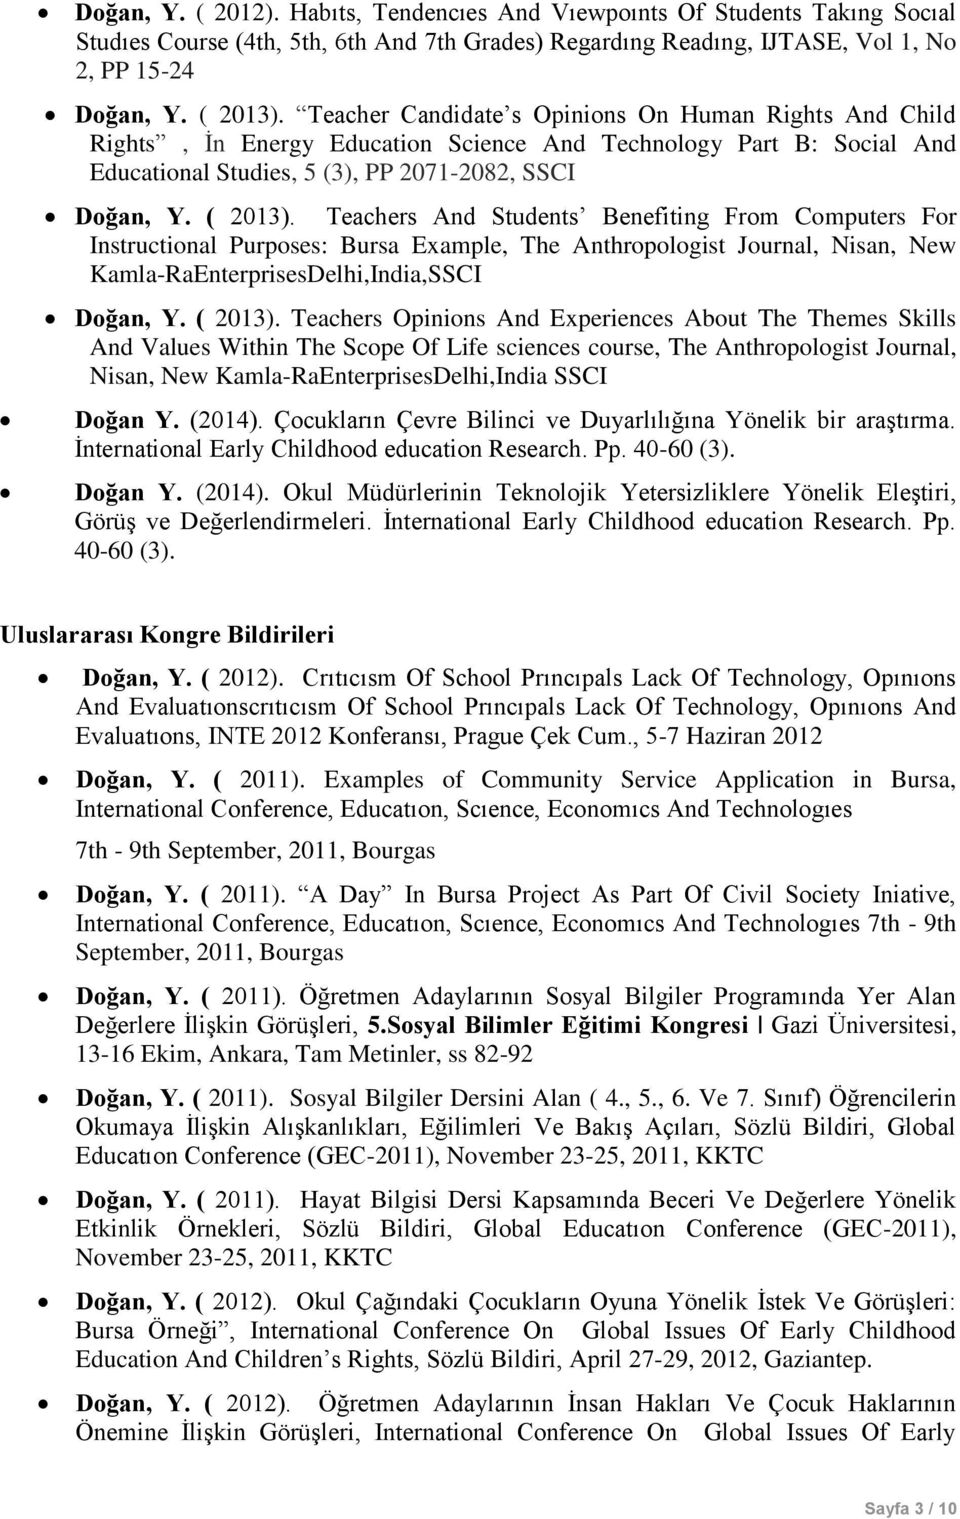 Teachers And Students Benefiting From Computers For Instructional Purposes: Bursa Example, The Anthropologist Journal, Nisan, New Kamla-RaEnterprisesDelhi,India,SSCI Doğan, Y. ( 2013).